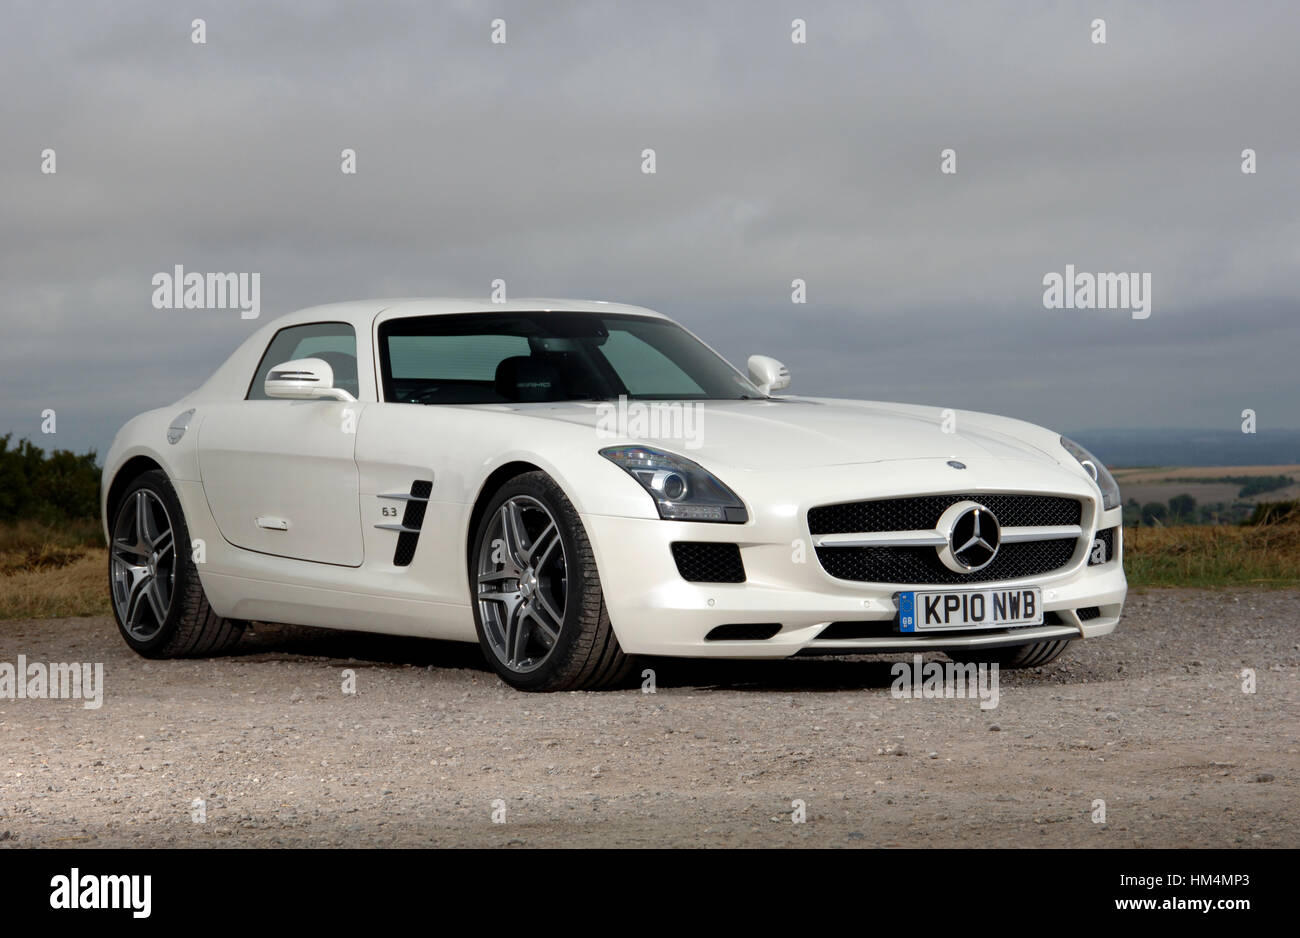 2010 Mercedes AMG SLS German super car with gull wing doors Stock Photo